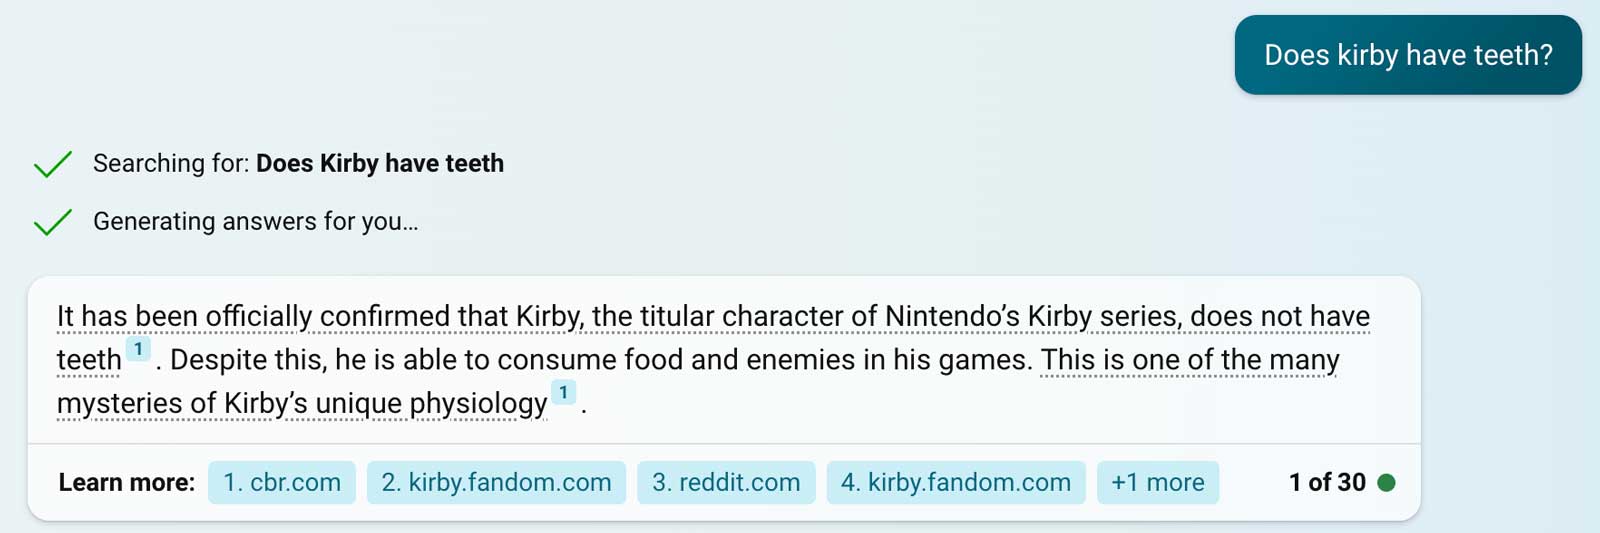 Bing Chat Question Does Kirby Have Teeth